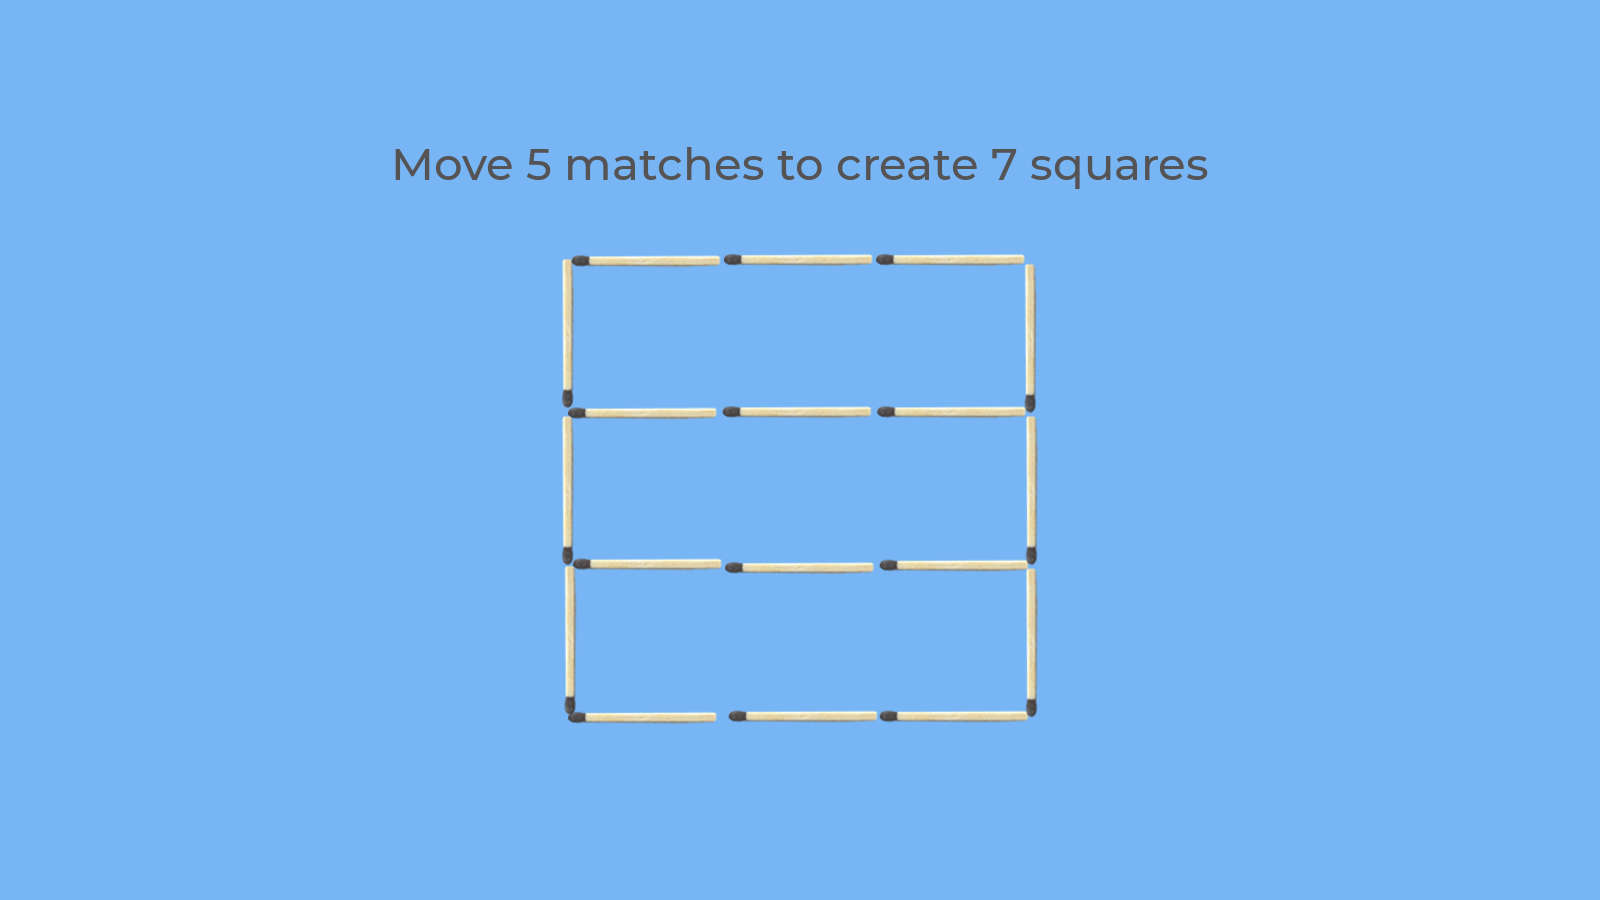 Move 5 matchsticks to create 7 squares puzzle